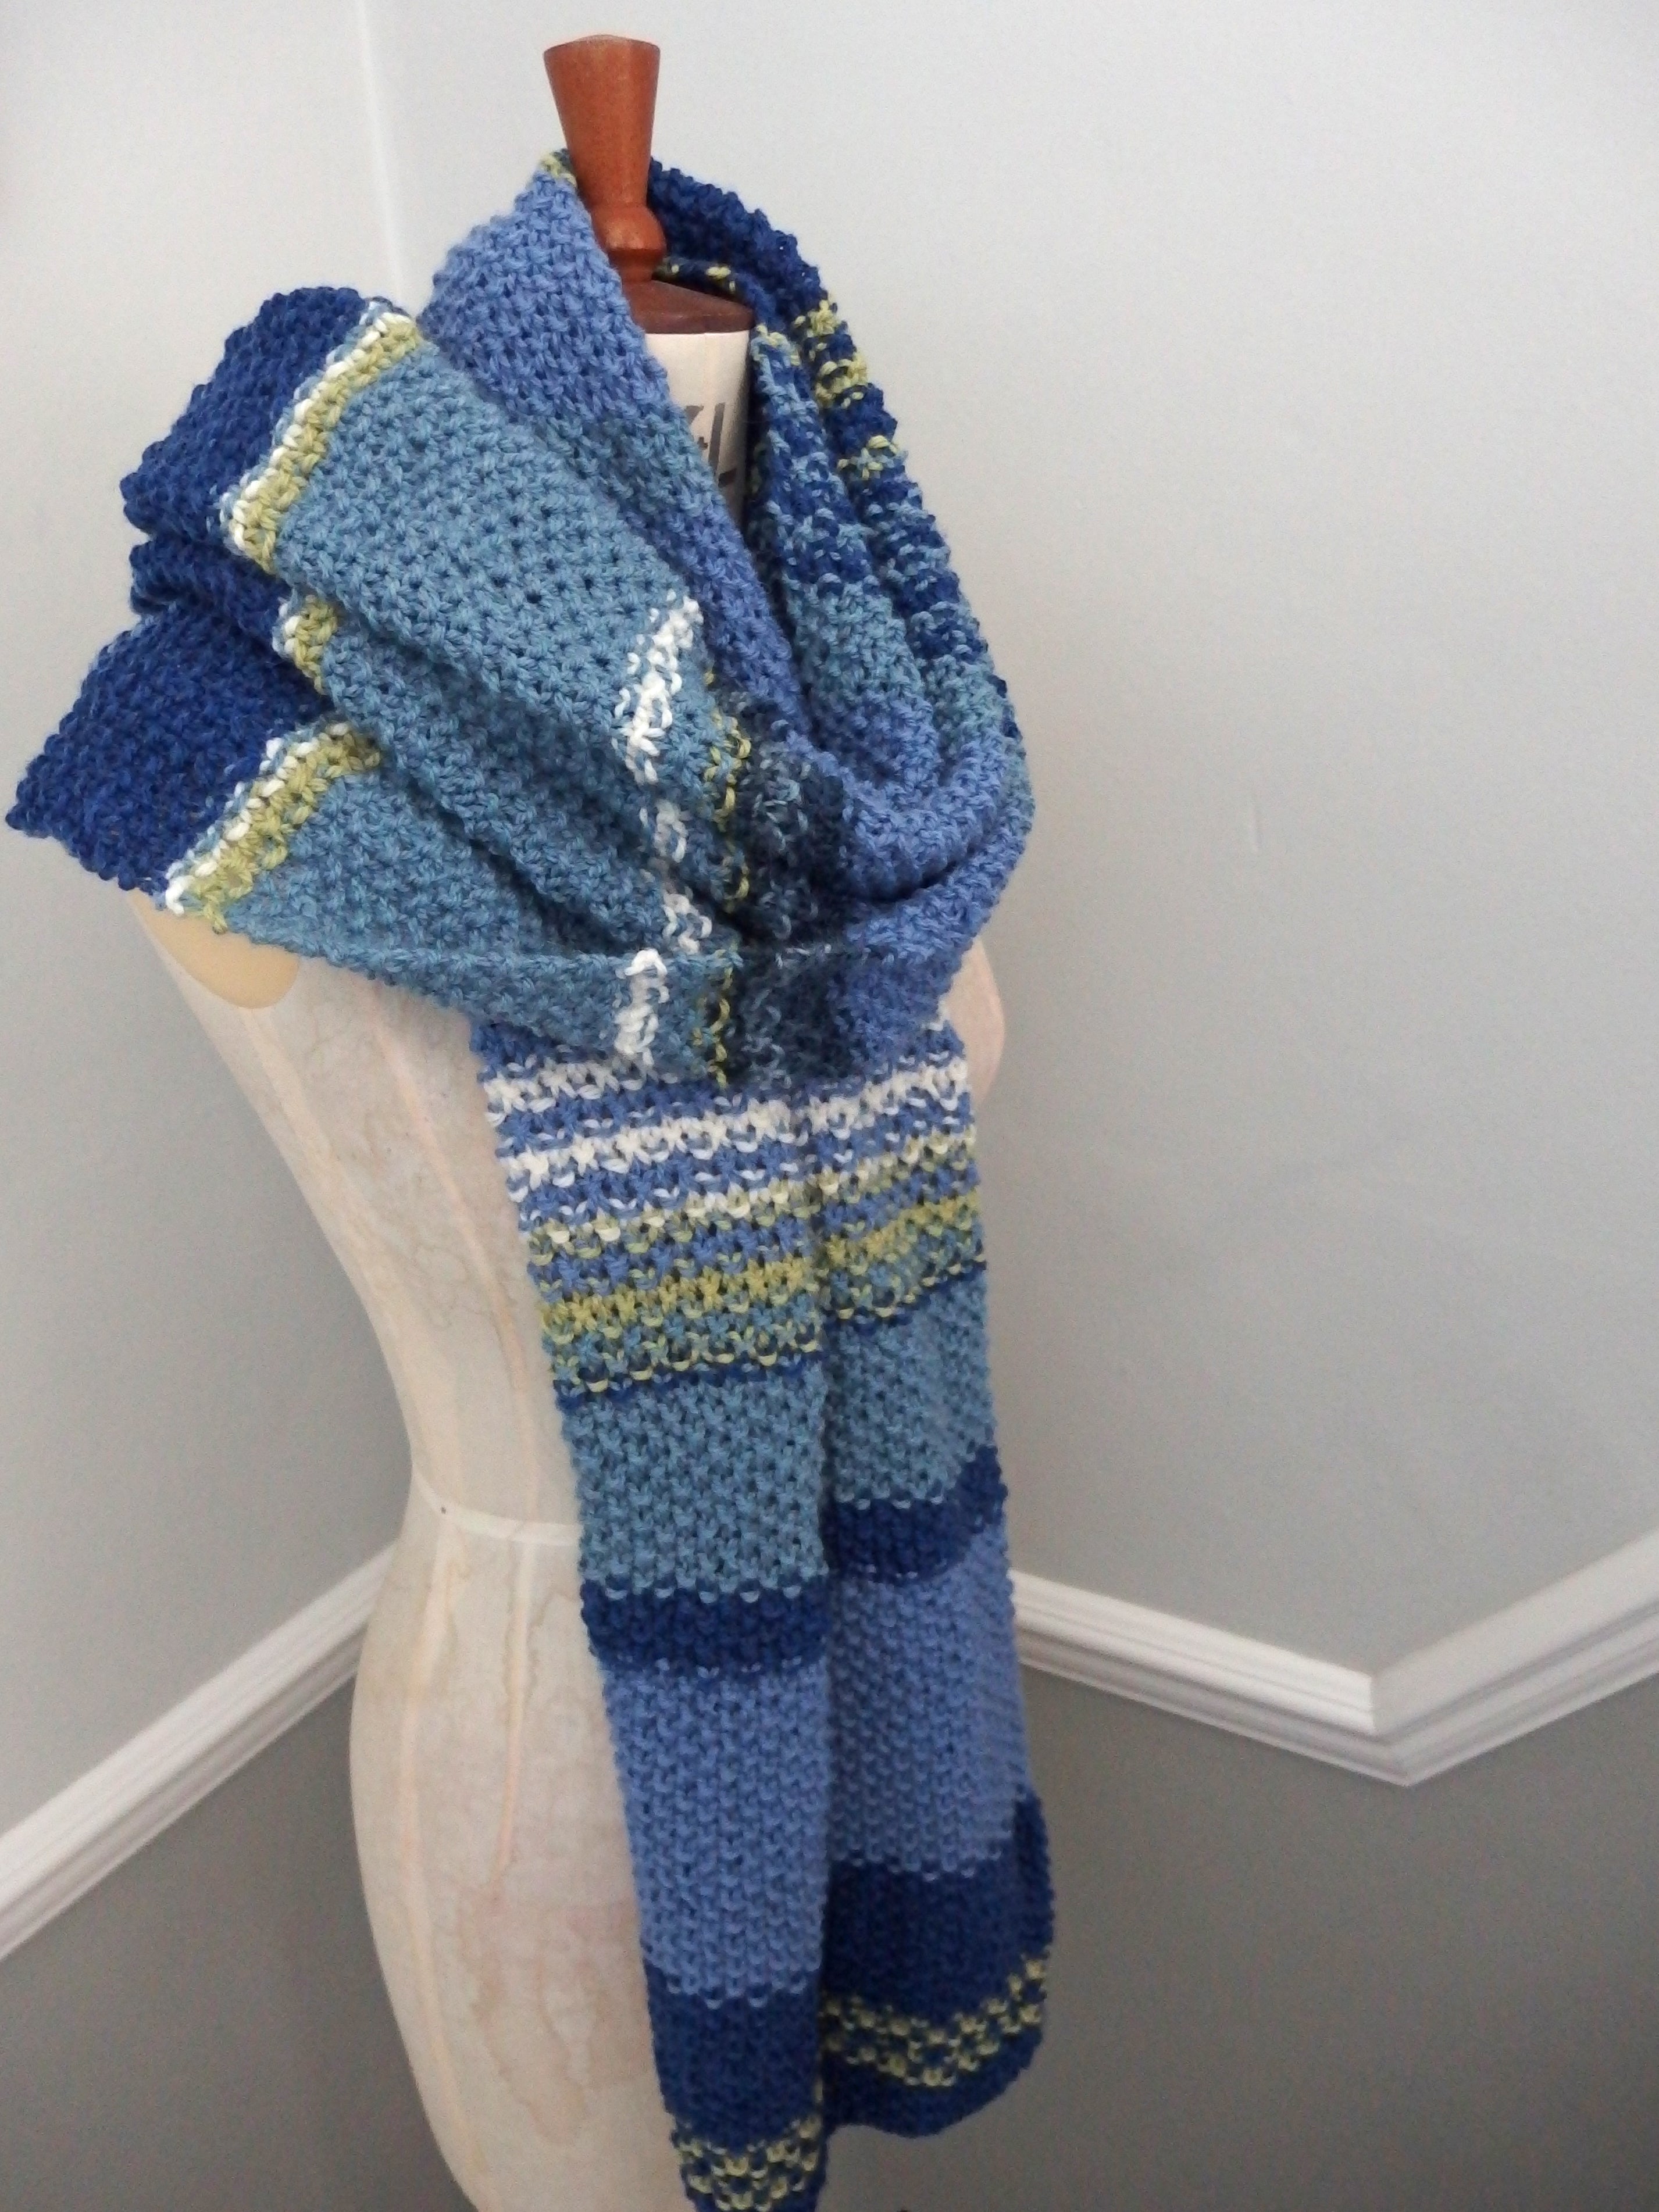 Scarf - Extraordinarily soft 100% Wool: Blue and Green Stripes